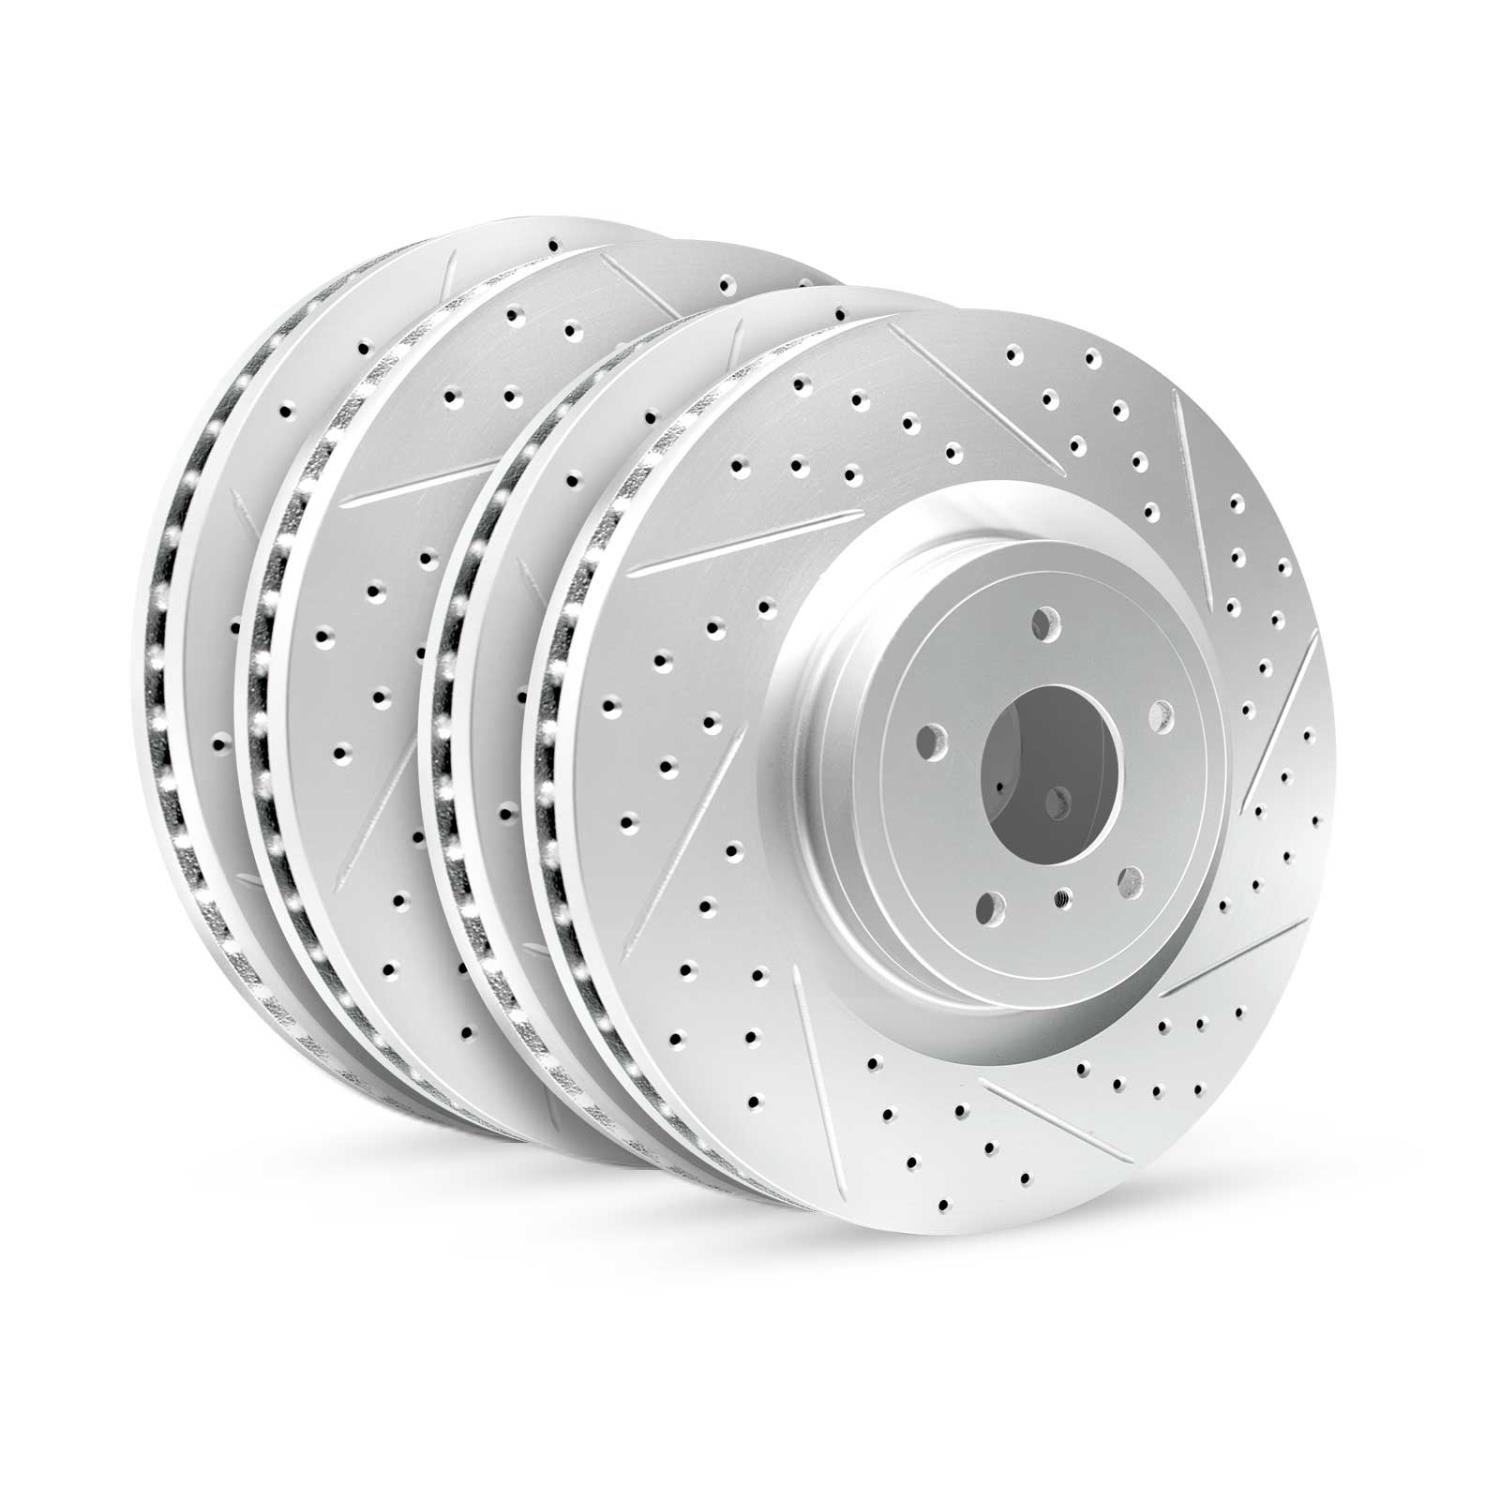 GEO-Carbon Drilled/Slotted Rotors, 1995-2001 Ford/Mazda,